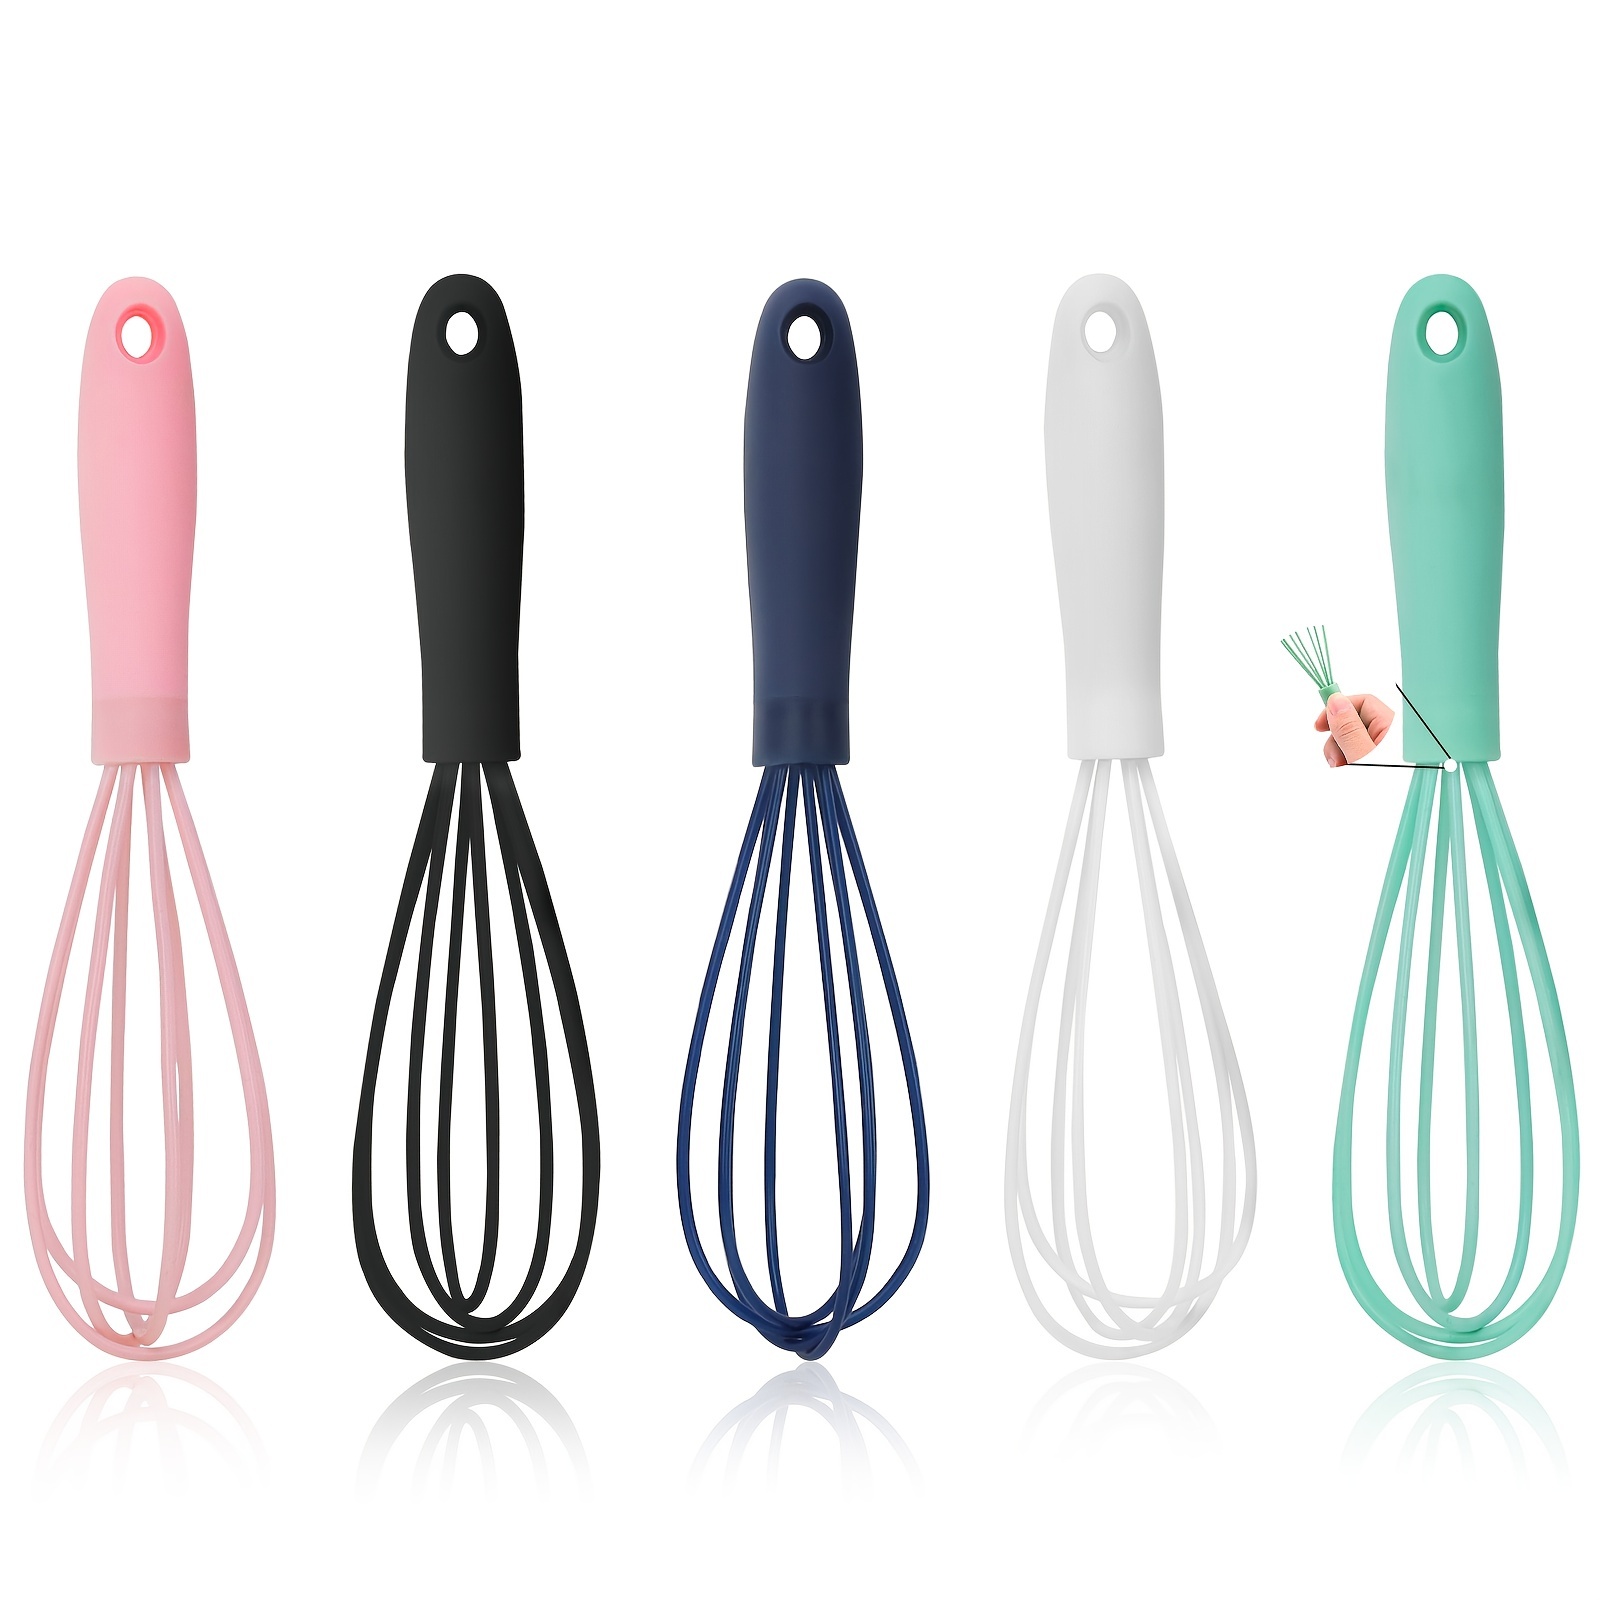 Verdental Cartoon Bear Small Whisks Set, Stainless Steel Mini Balloon Whisk  for Stirring Mixing Egg Beater with Cute Ceramic Handle (4 Pieces)